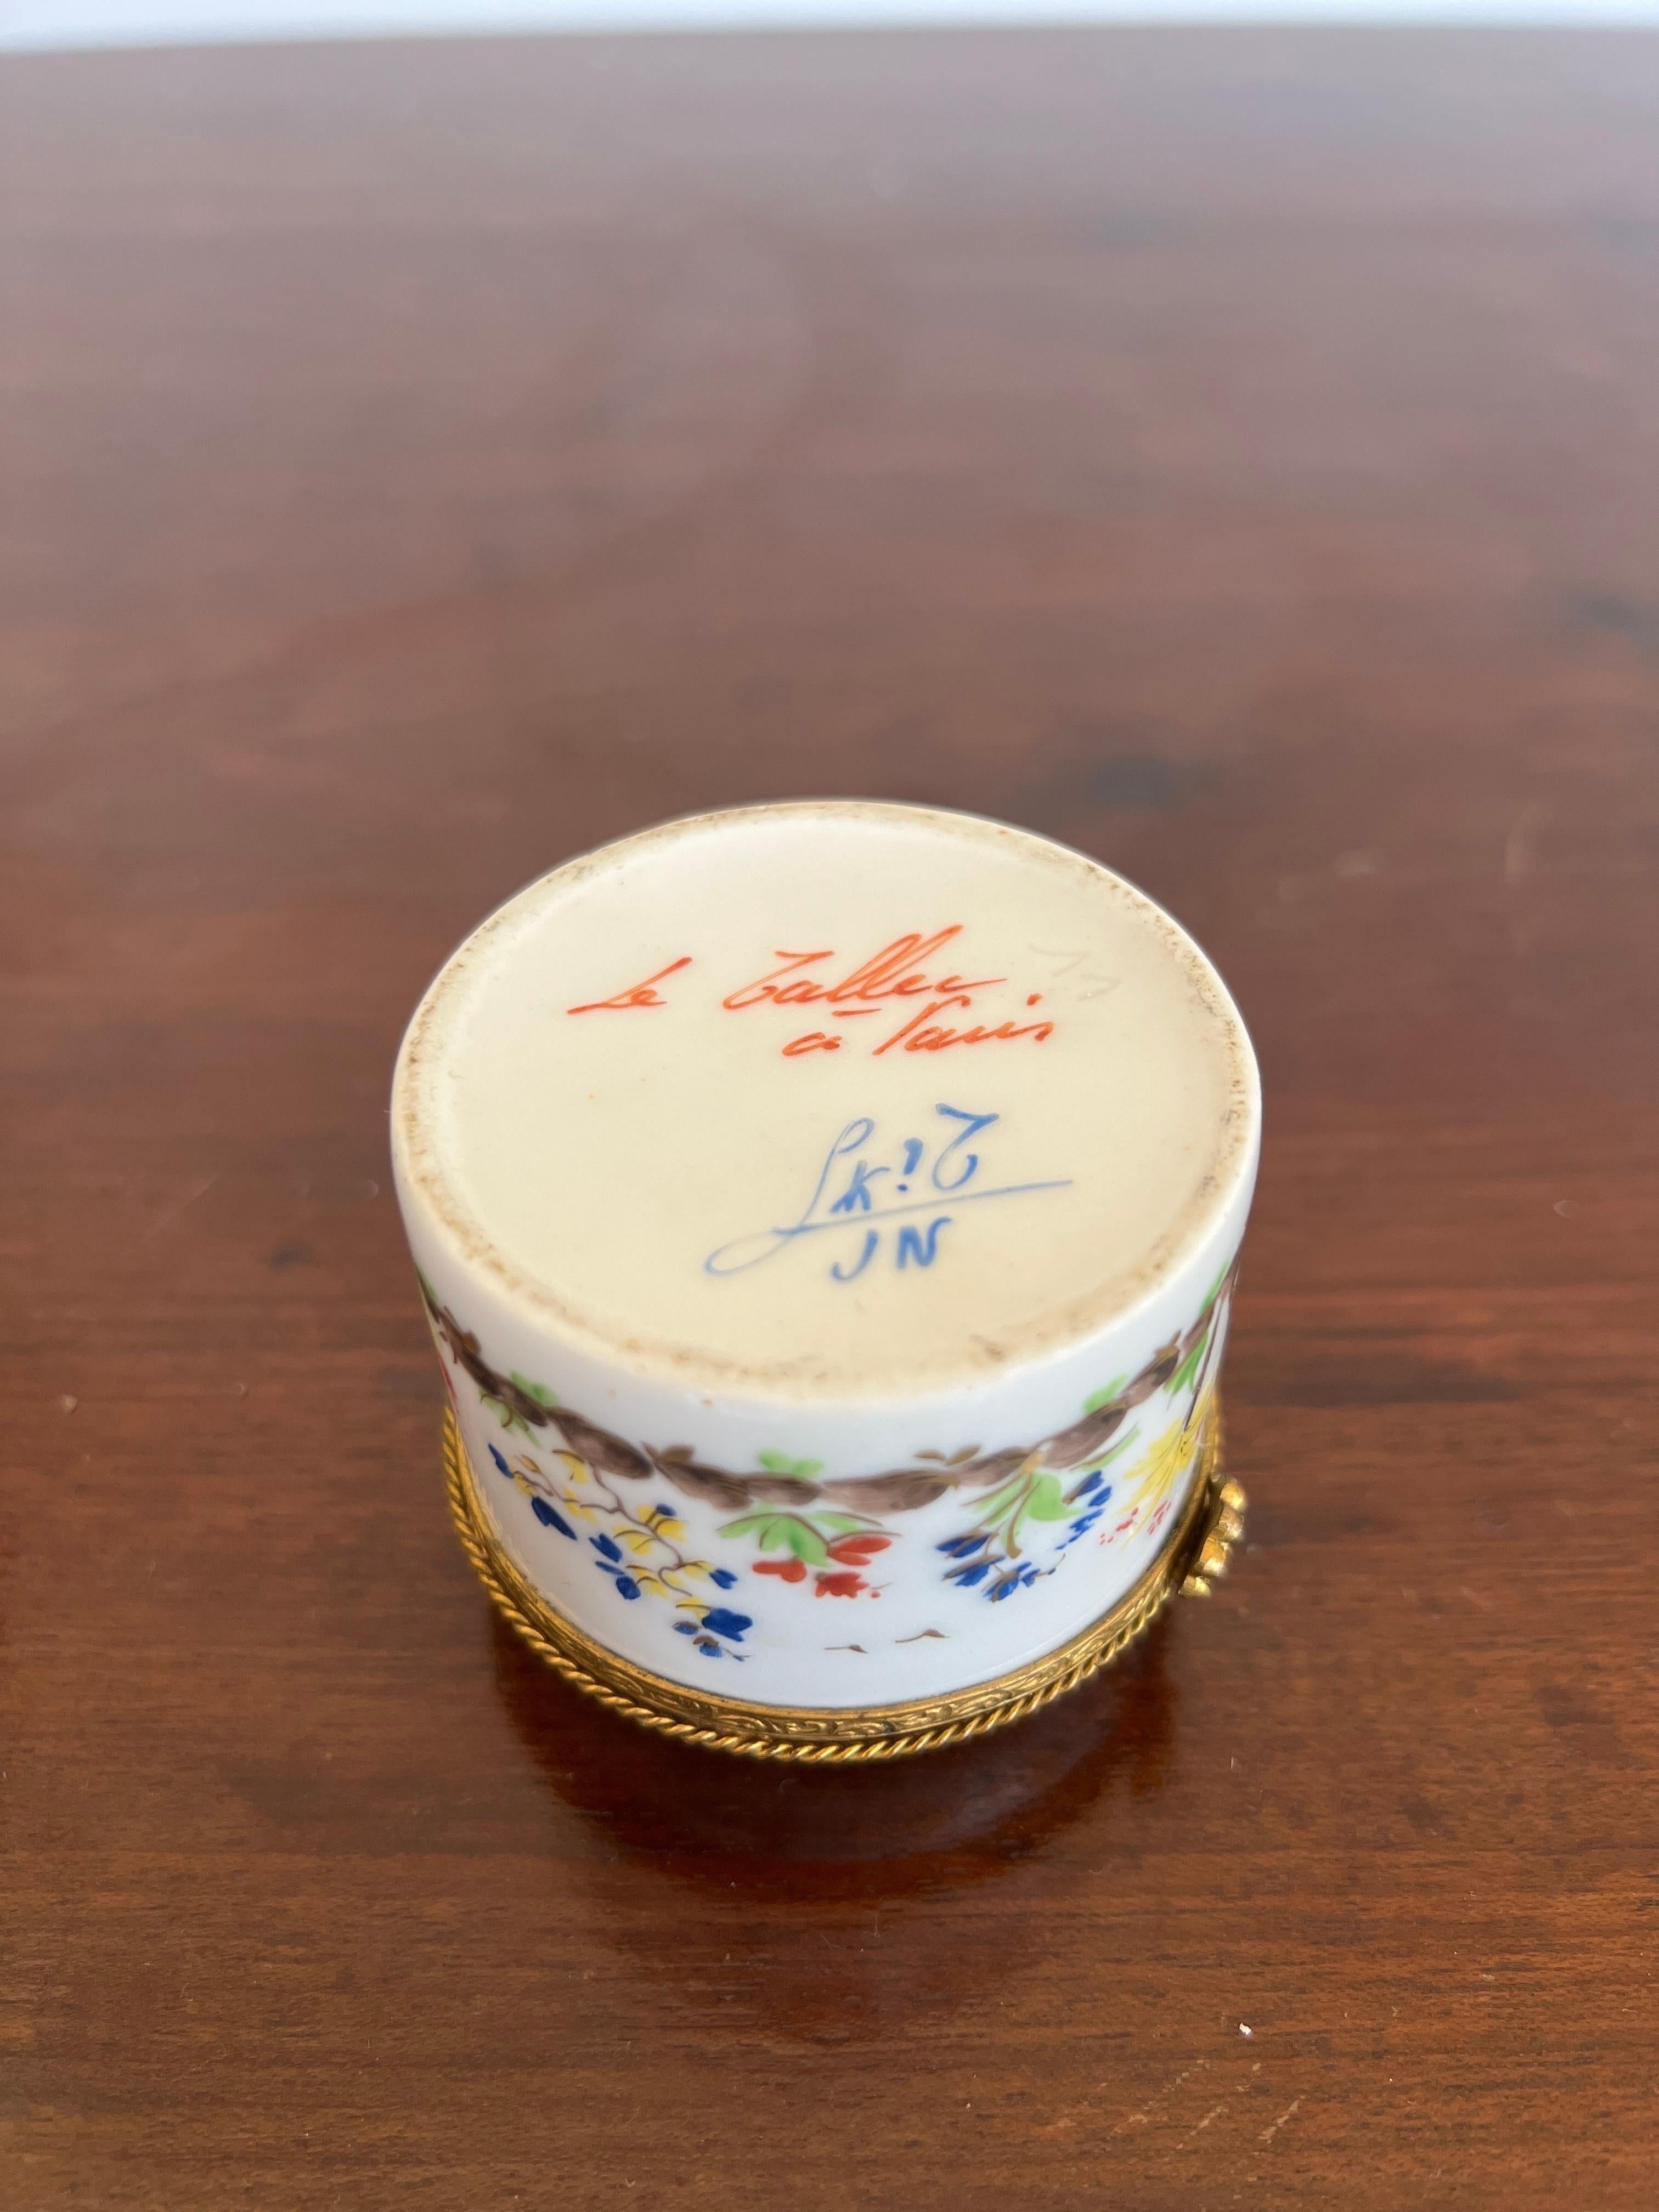 Tiffany Le Tallec Cirque Chinois Porcelain Box For Sale 1